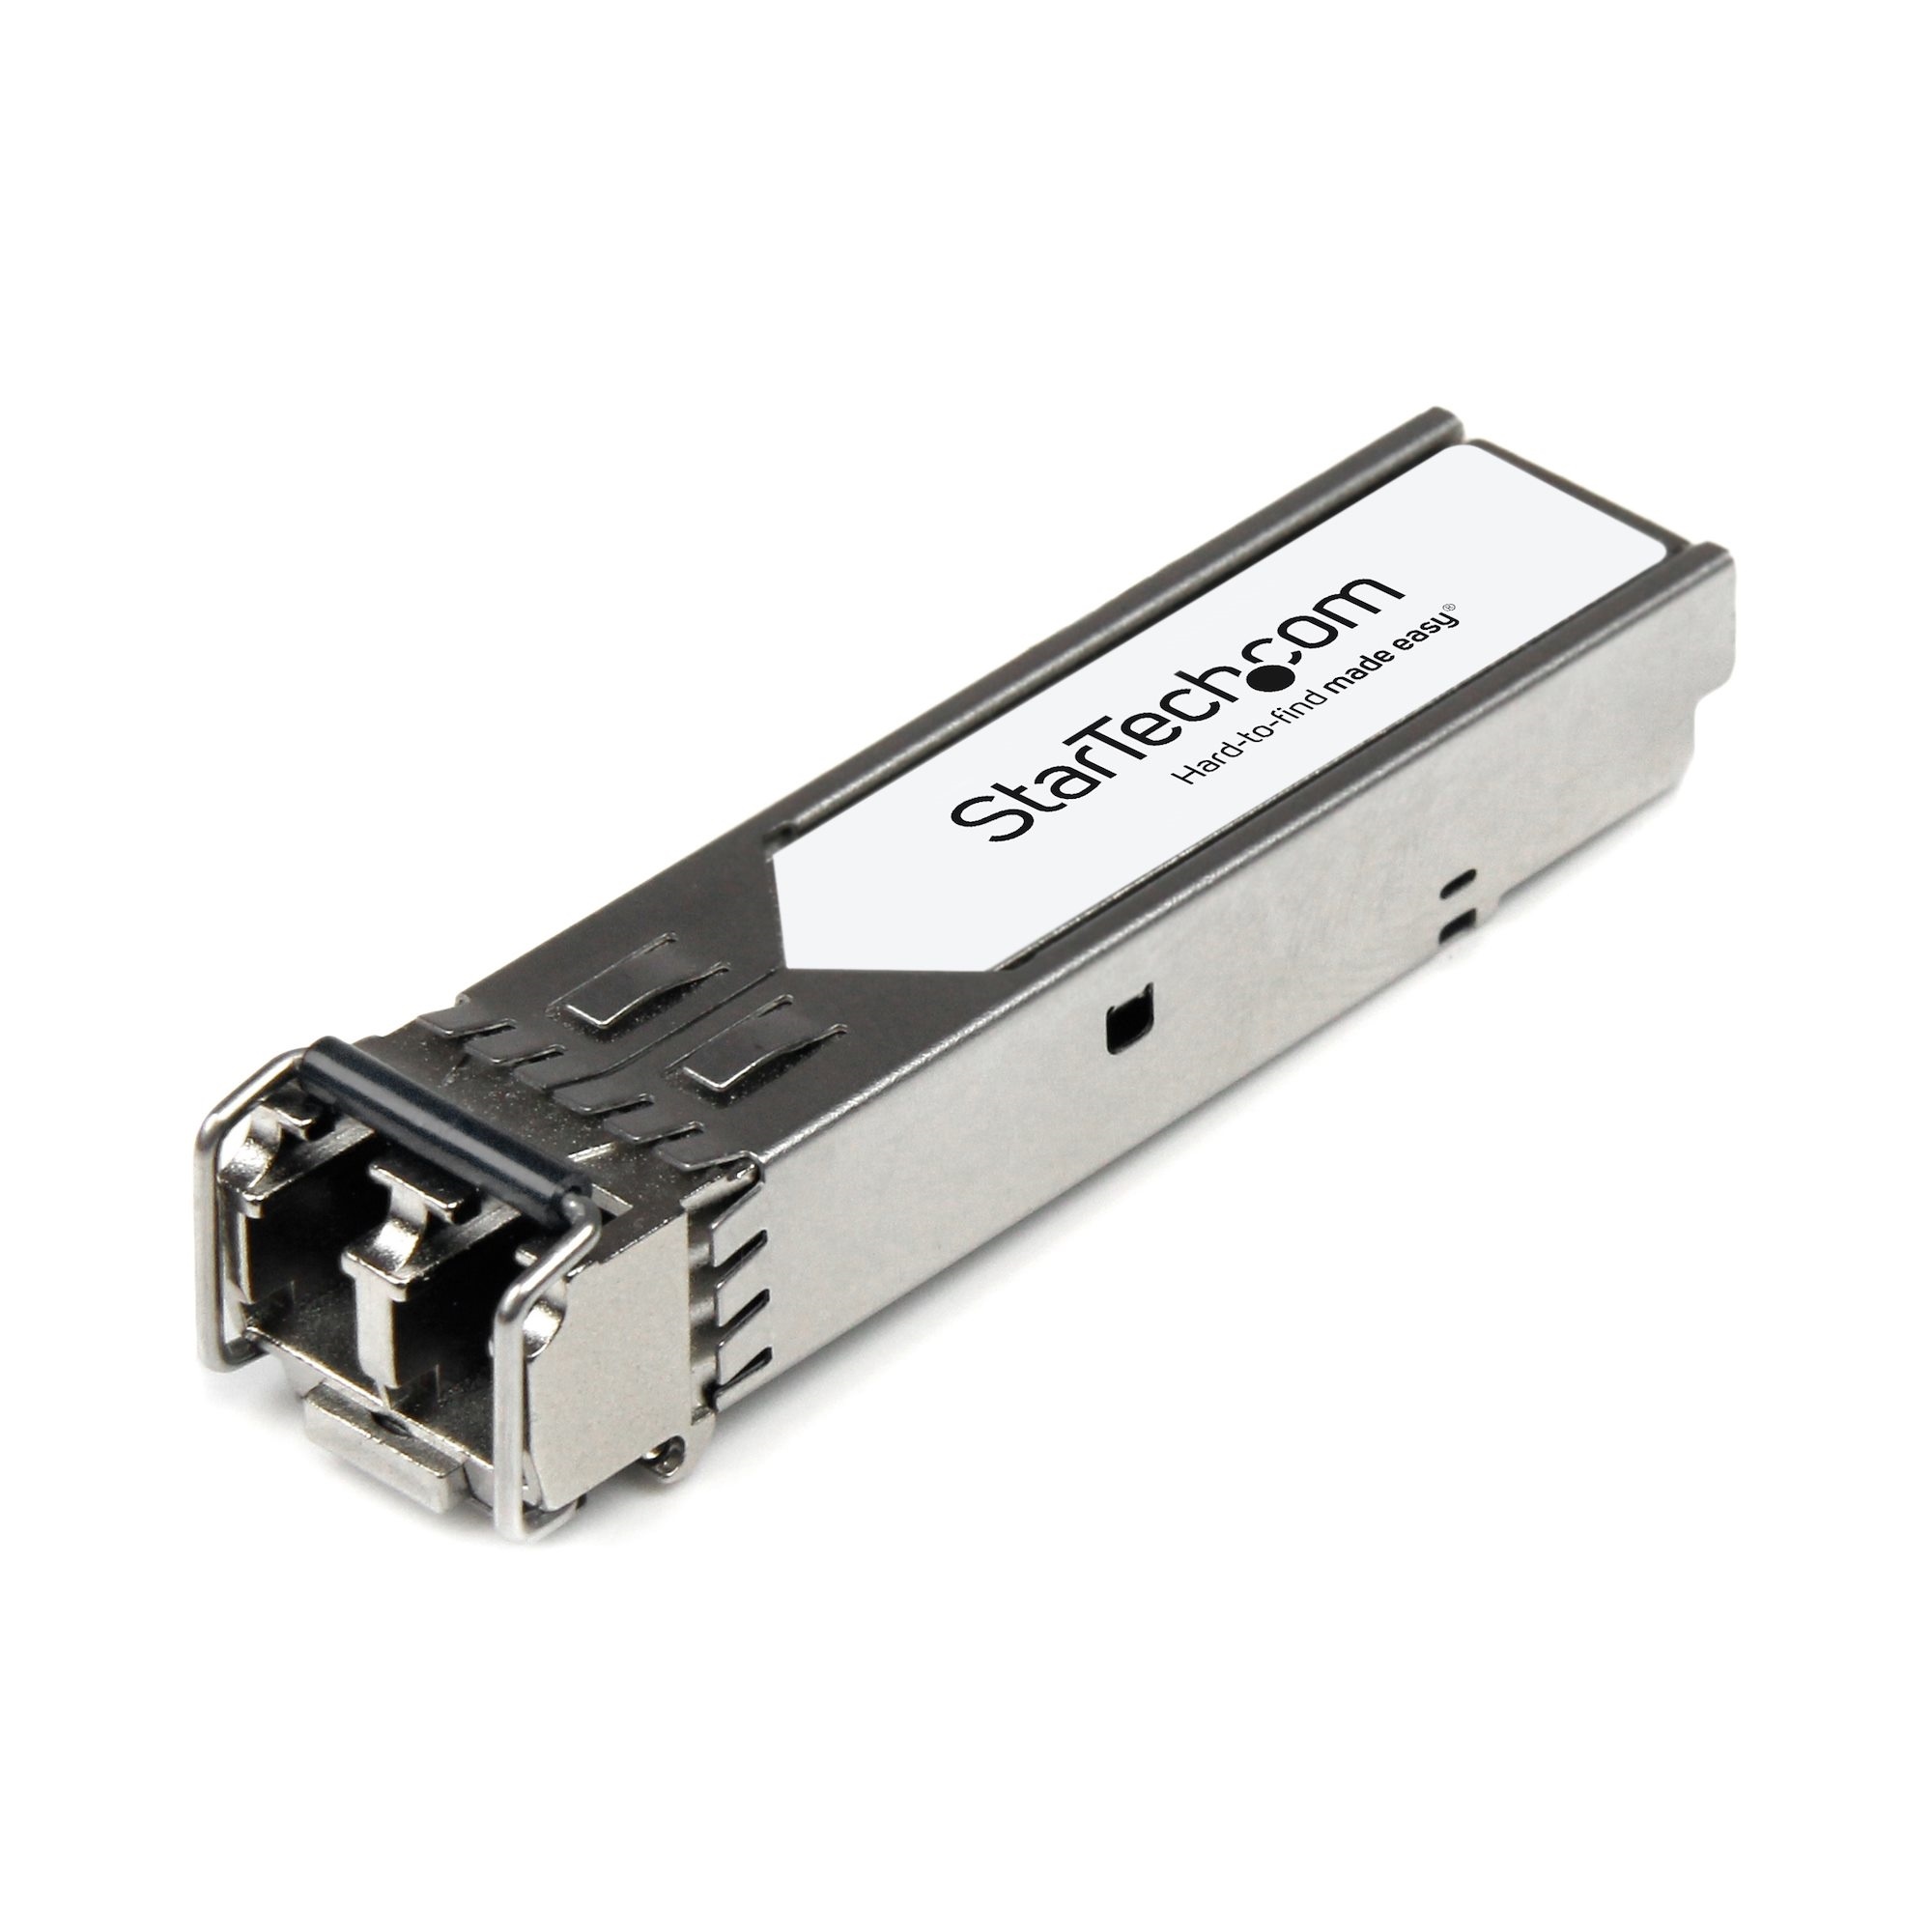 Startech Extreme Networks 10051 Compatible SFP Module